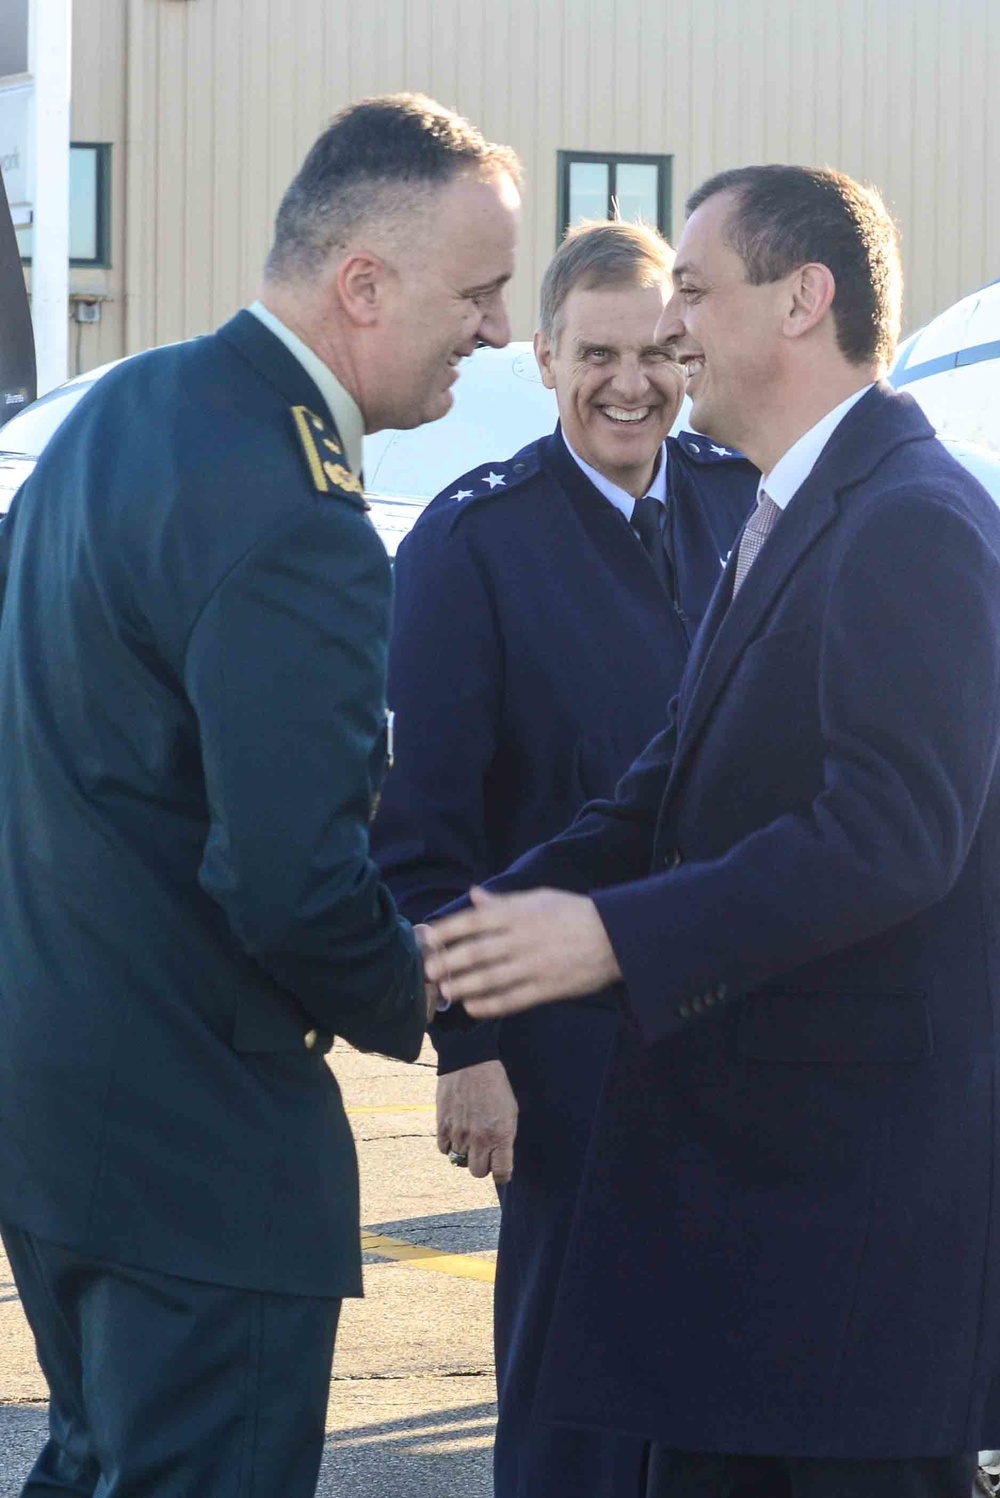 Montenegrin Minister of Defense Visits Maine